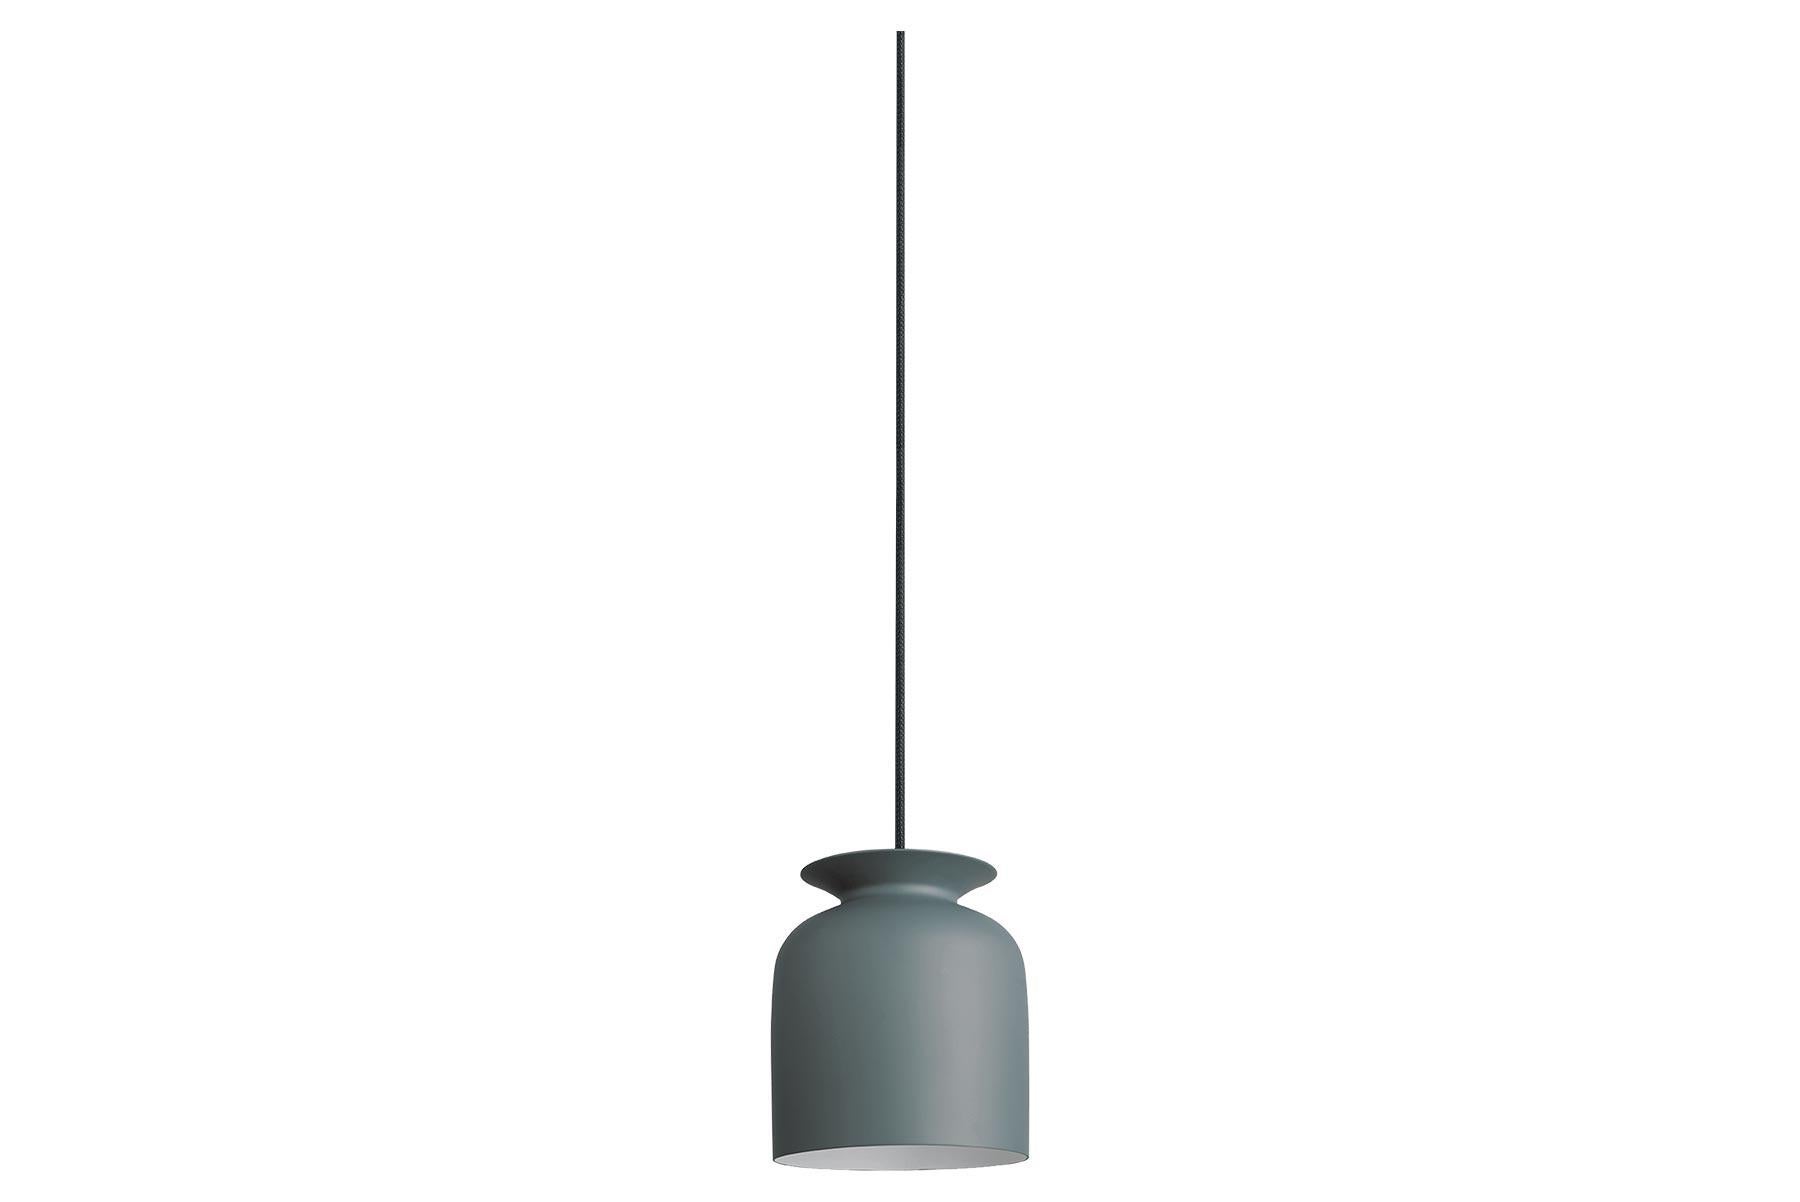 With its Industrial, yet friendly look Ronde Pendant is well-suited for both home decor and professional environments. Hang a few Ronde Pendants in the kitchen, place the smallest Ronde on each side of the bed or use one of the larger Ronde Pendants